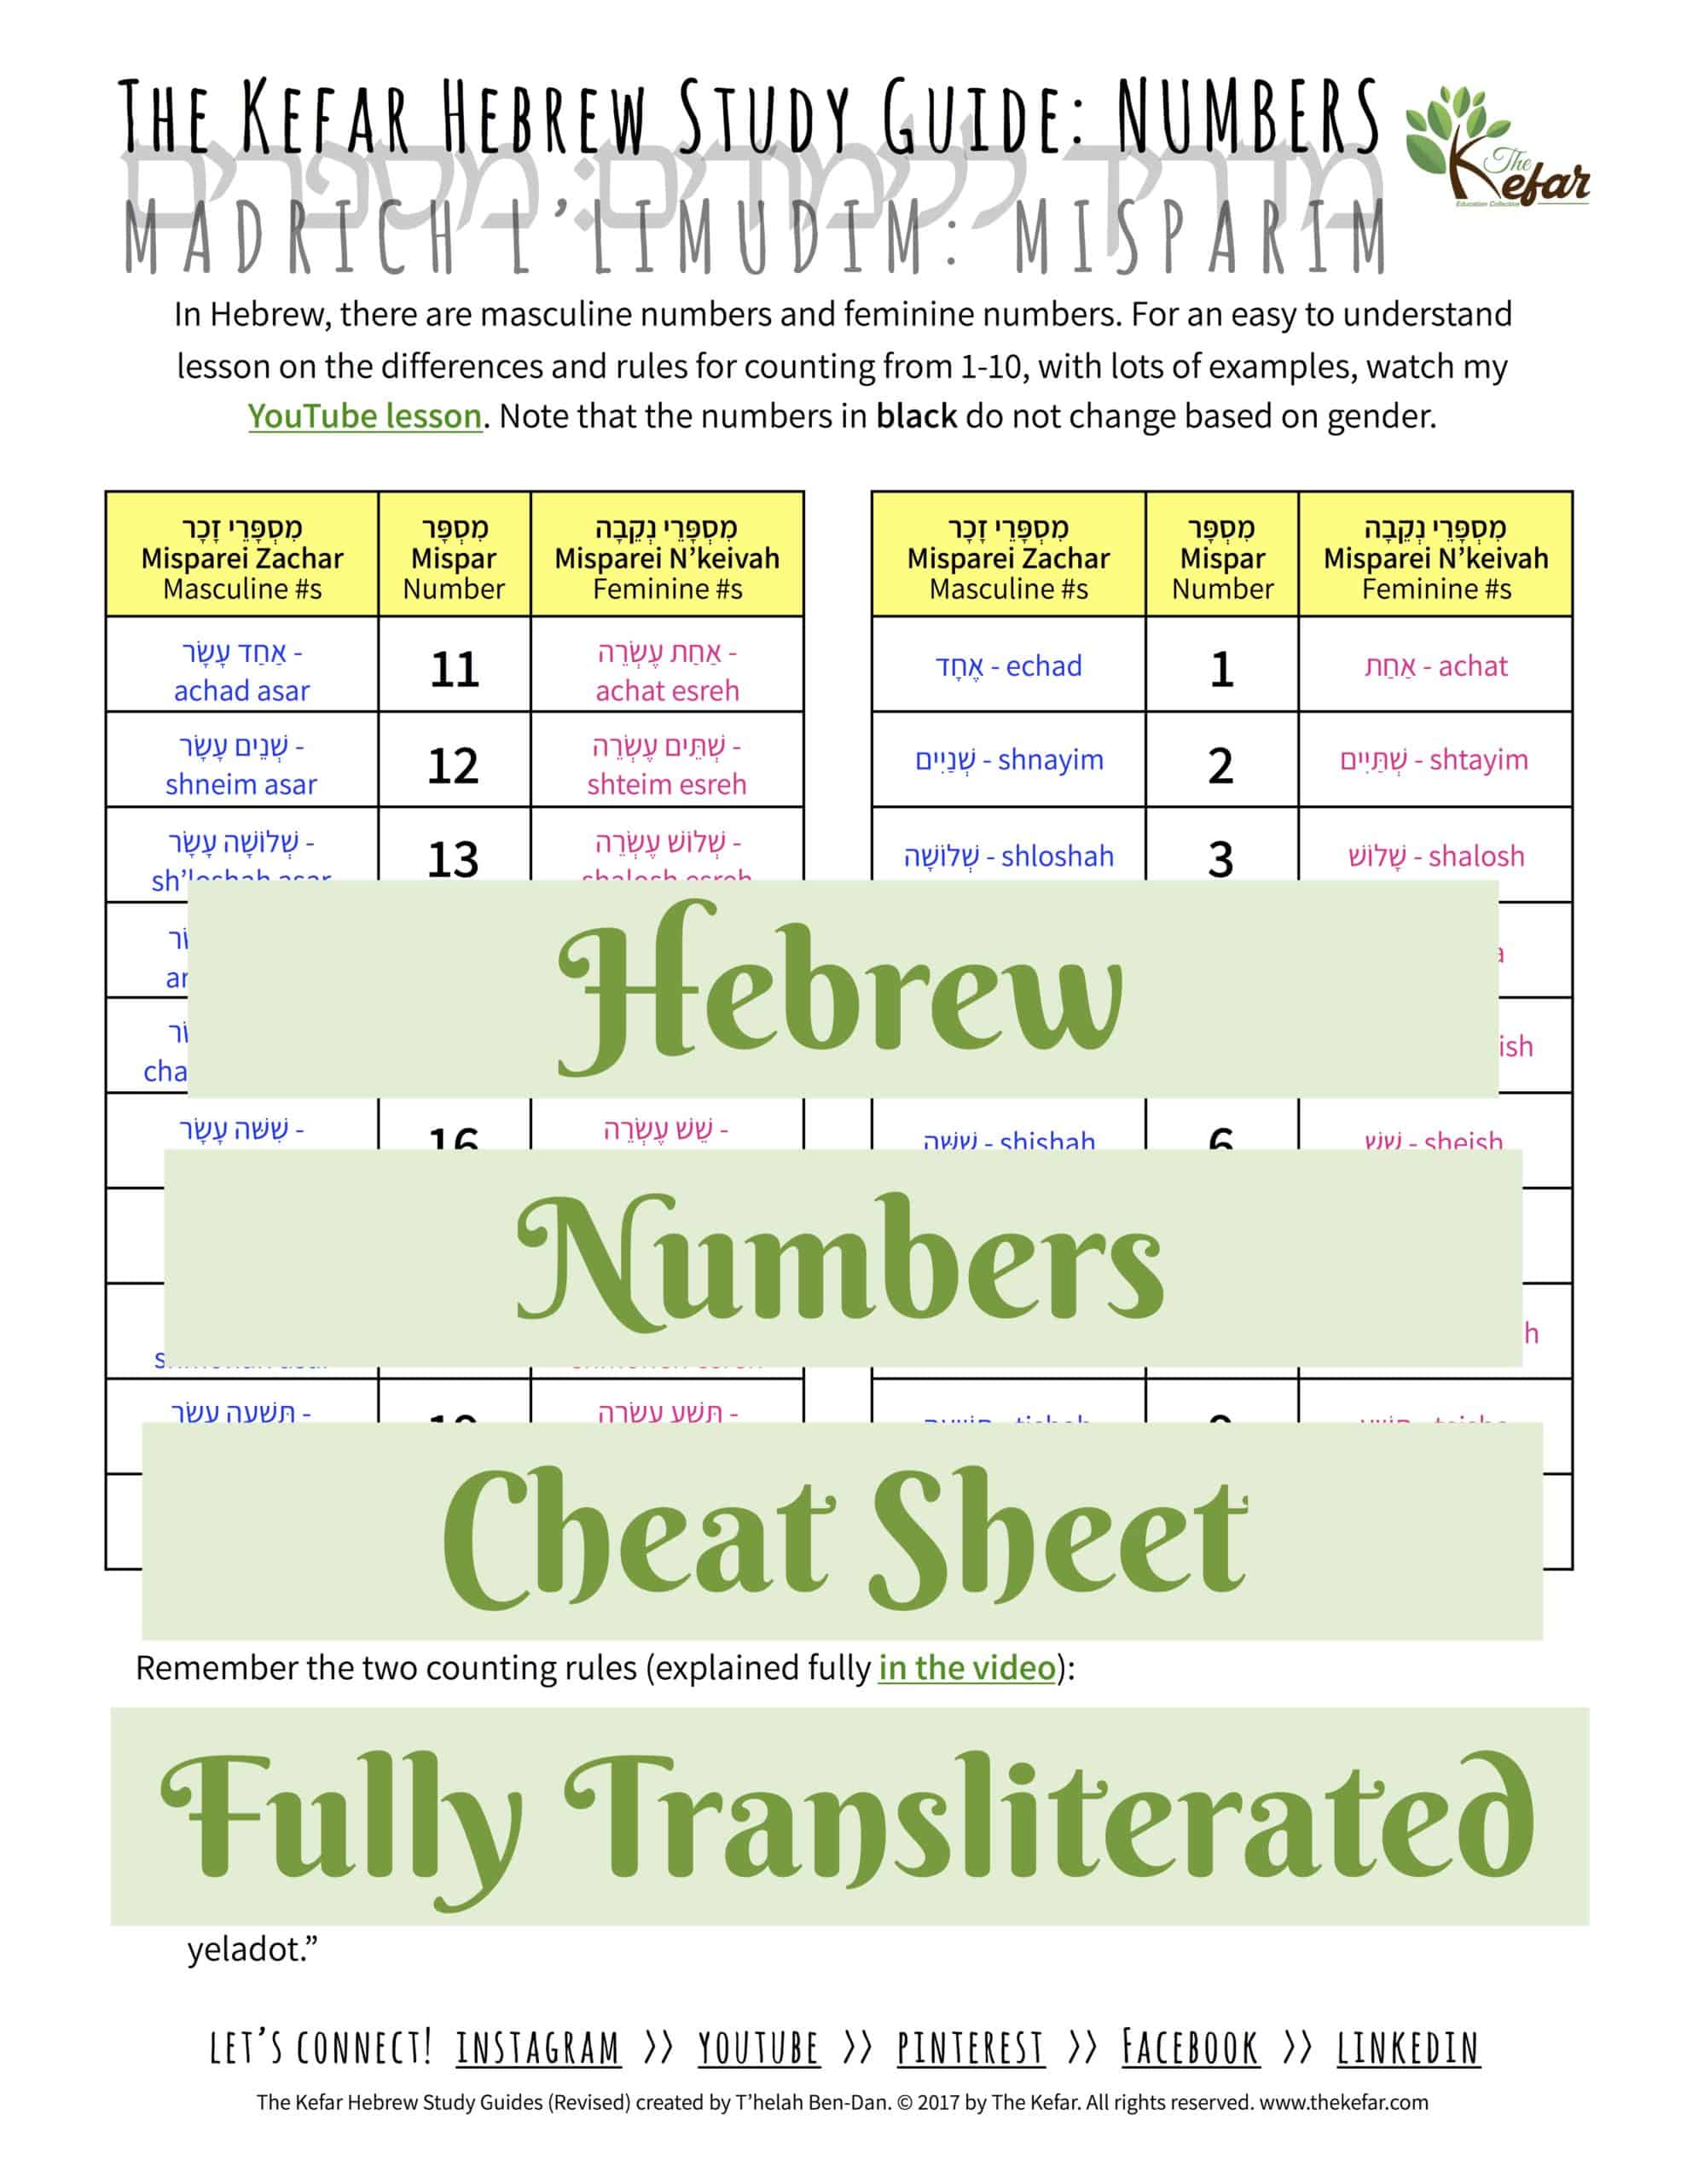 Hebrew Numbers Cheat Sheet Fully Transliterated The Kefar